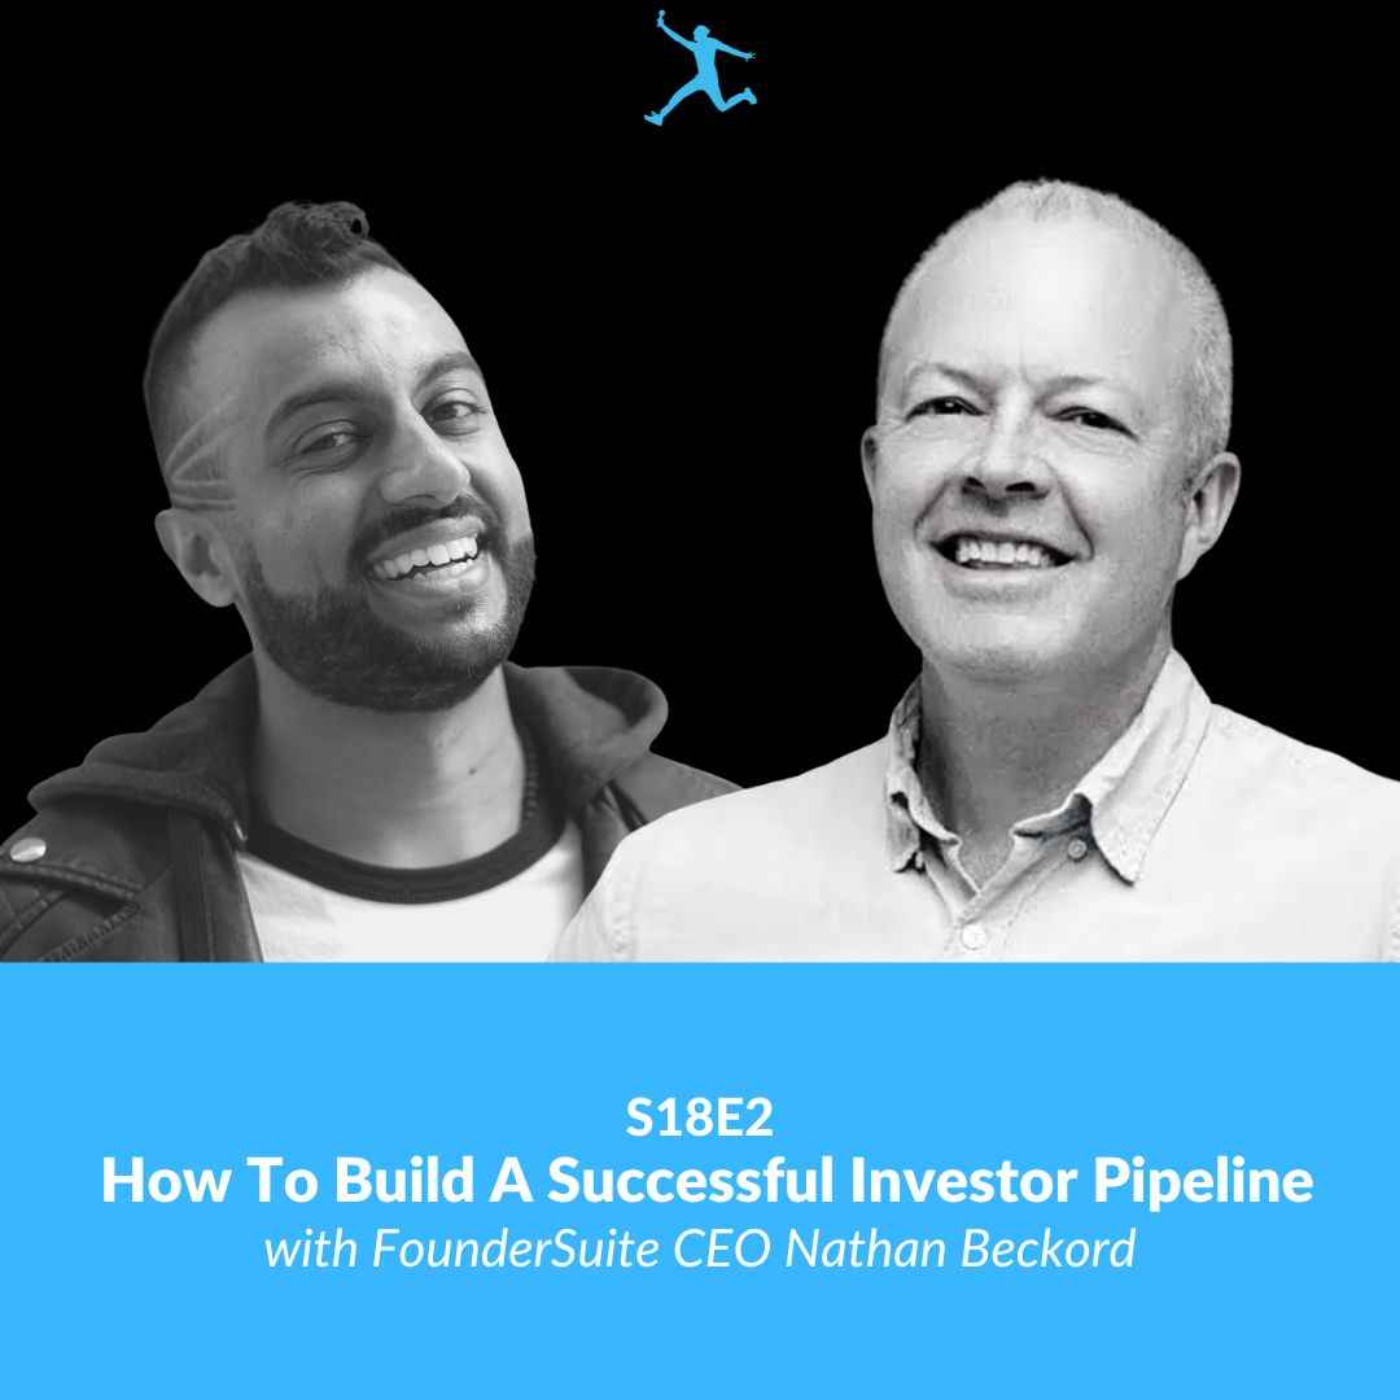 S18E2: Building A Hot Investor Pipeline with FounderSuite CEO Nathan Beckord